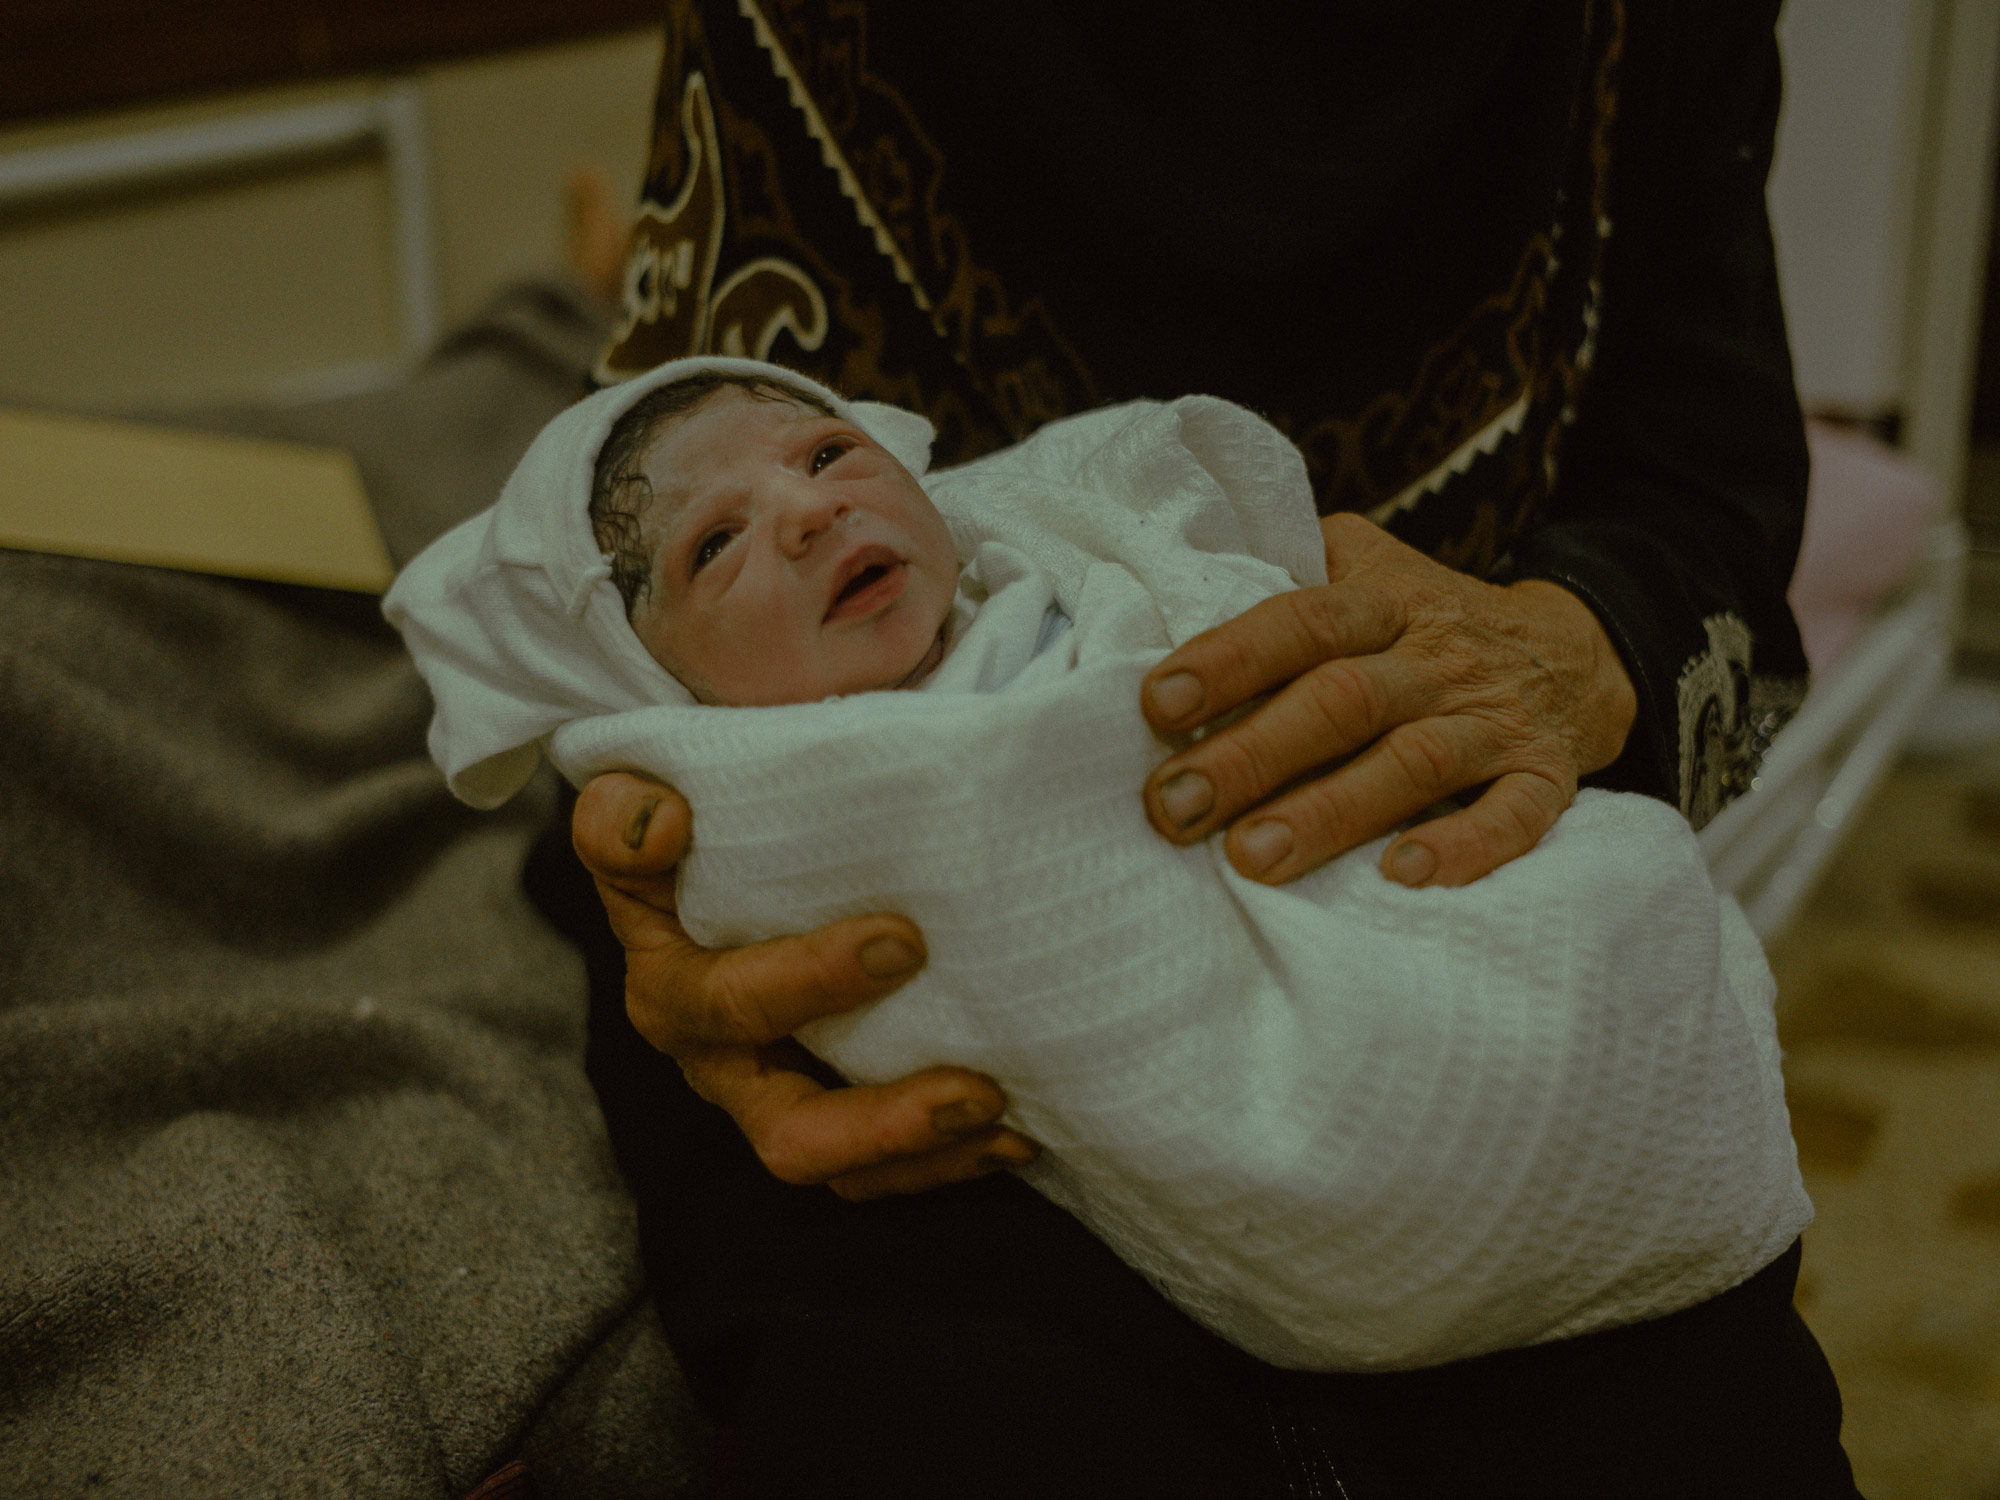 Iraq. Mosul. 17 September 2021. Noor Ibrahim, a newborn, in the arms of his grandmother Shaima at MSF’s Nablus hospital. They came from Rabia, a city on the border with Syria, 120 kilometres from Mosul. 